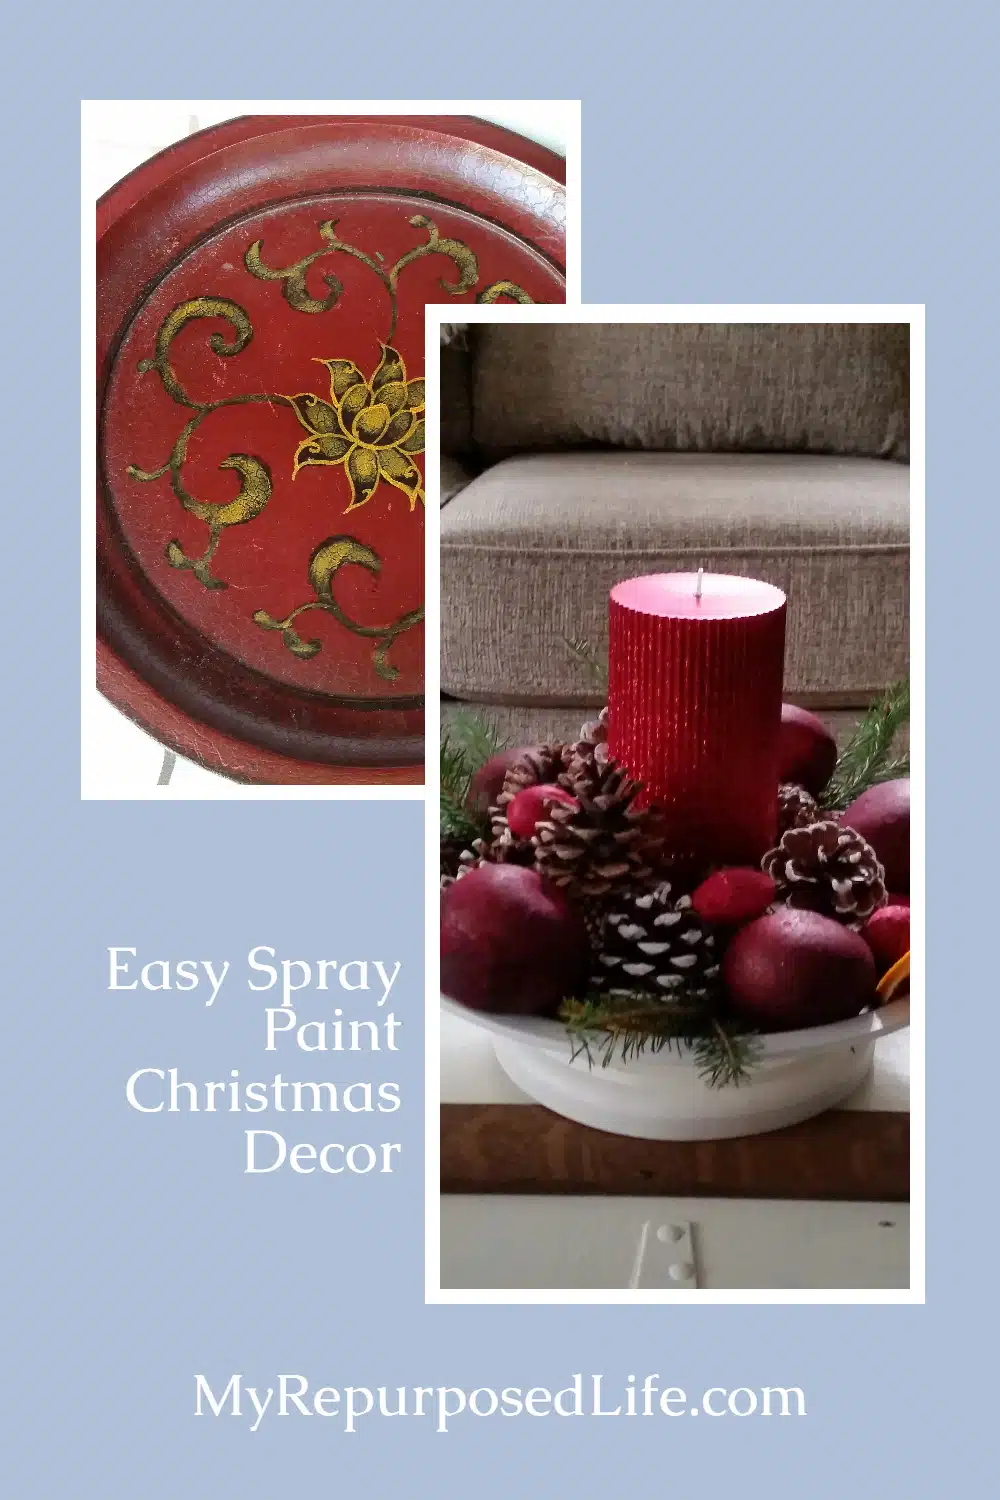 How to change up a thrift store platter with spray paint into a pretty new Christmas decor project. #MyRepurposedLife #upcycle #Christmasdecor #Christmas via @repurposedlife